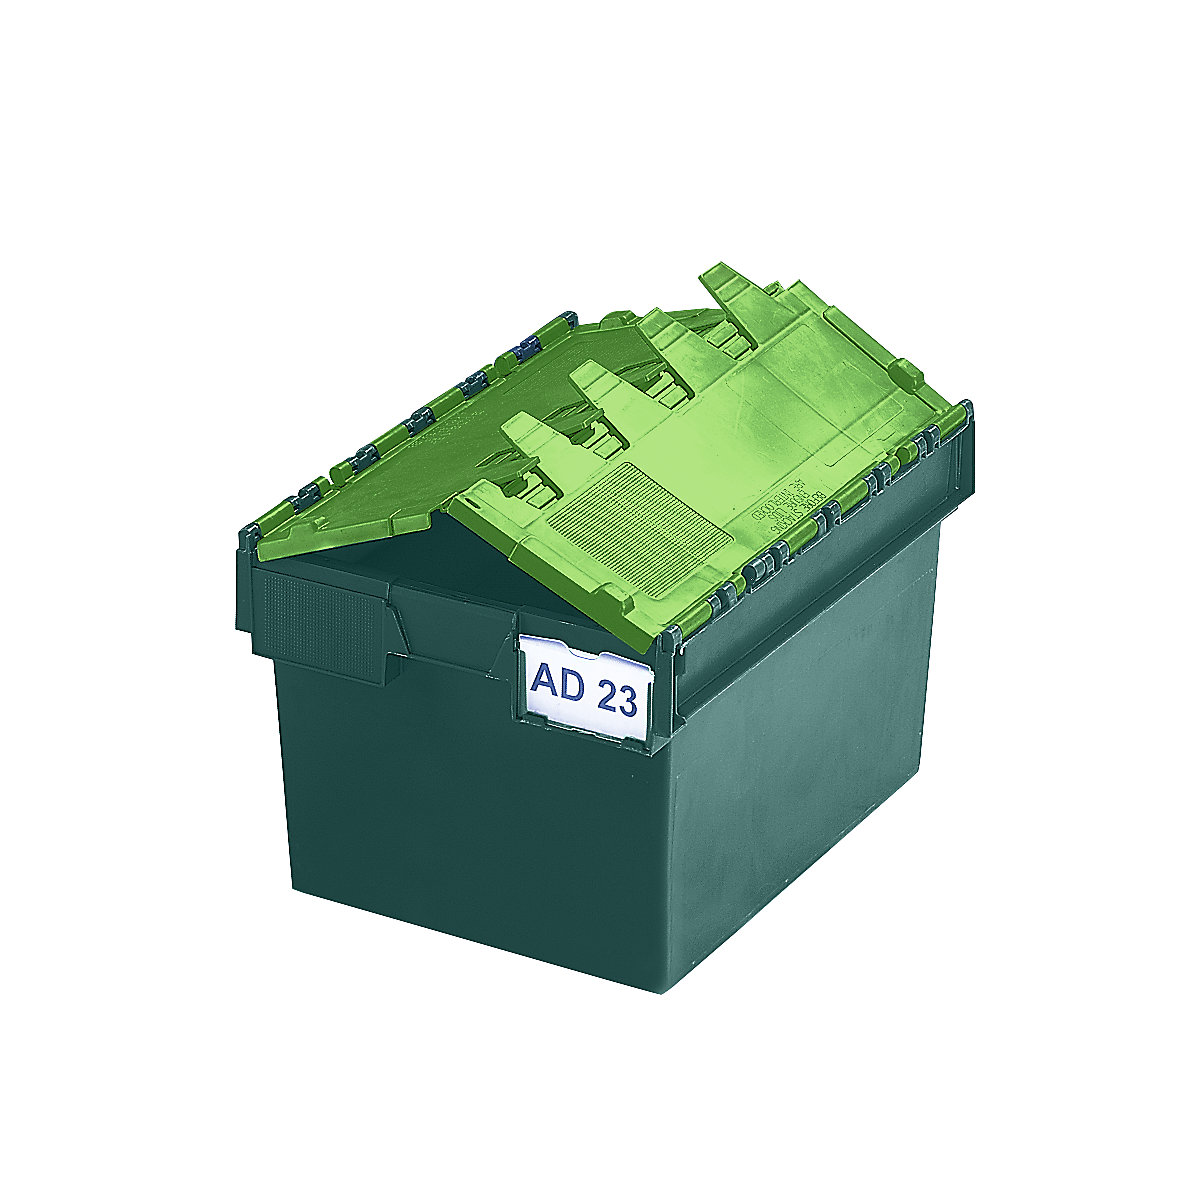 KAIMAN reusable stacking container, capacity 54 litres, LxWxH 600 x 400 x 320 mm, green